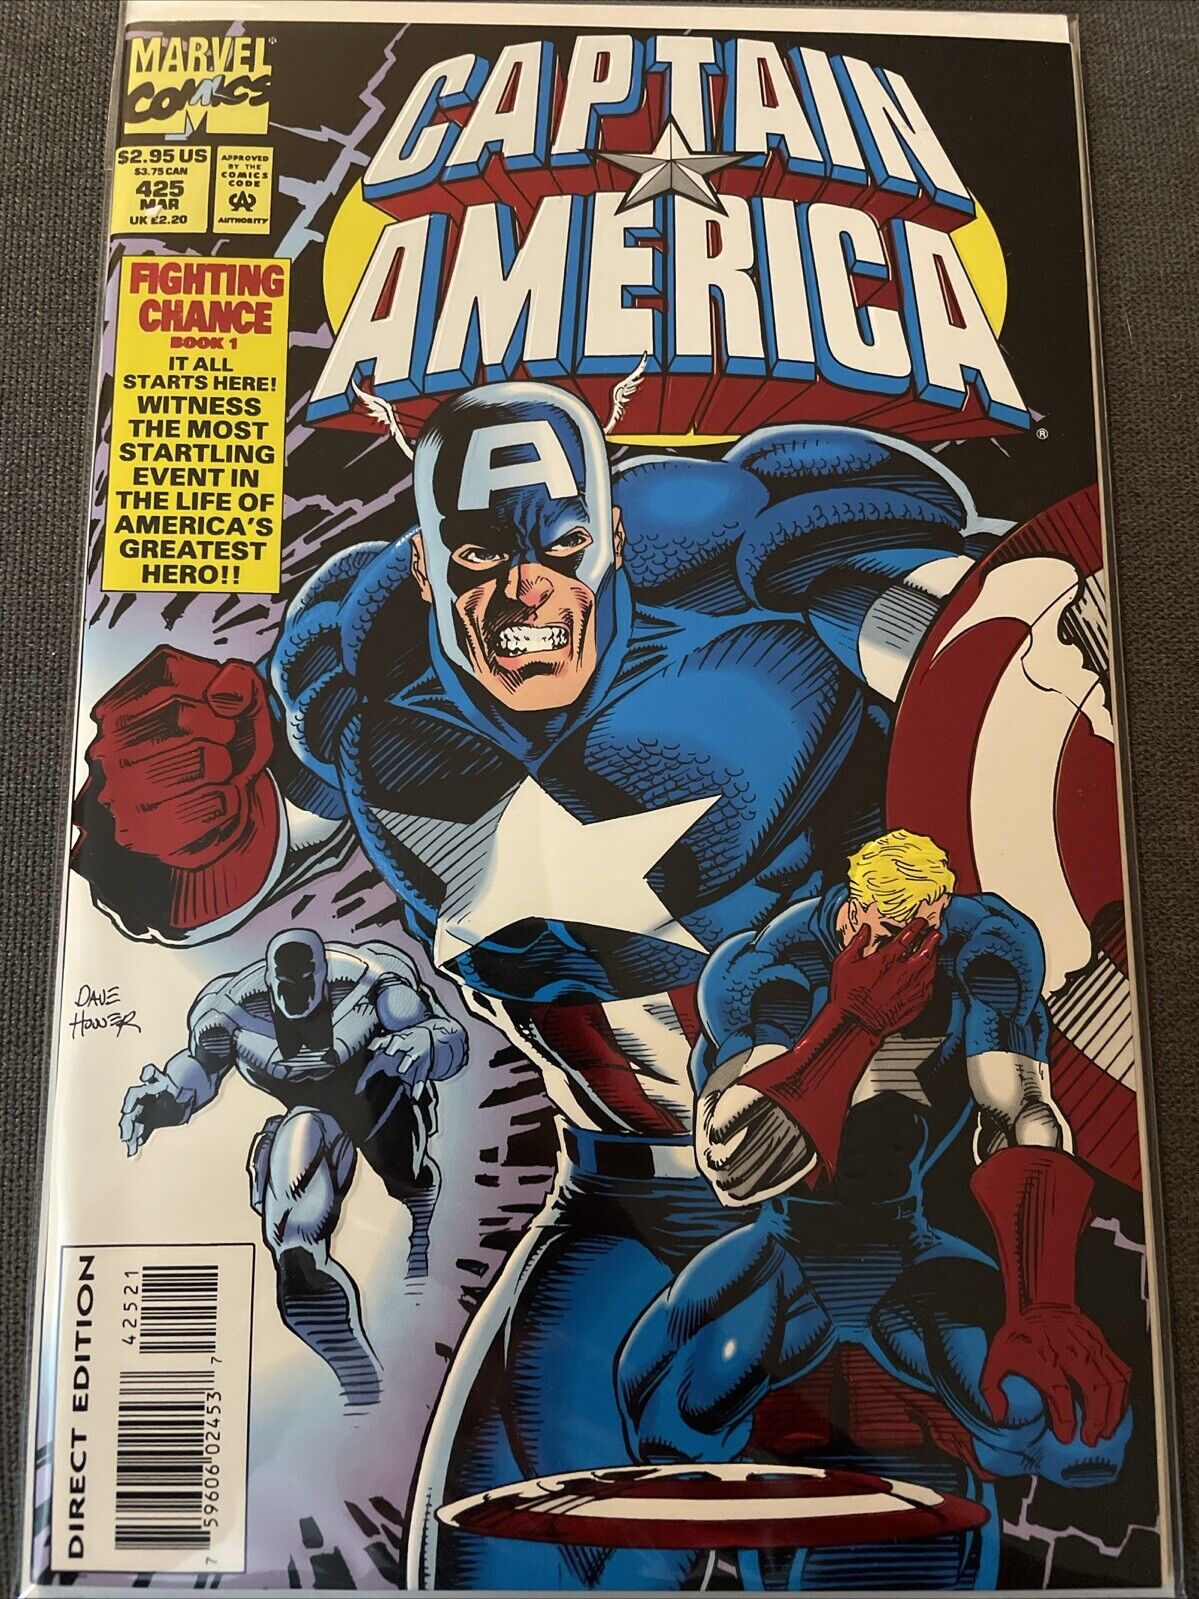 Marvel -  CAPTAIN AMERICA #425 (Great Condition) bagged and boarded